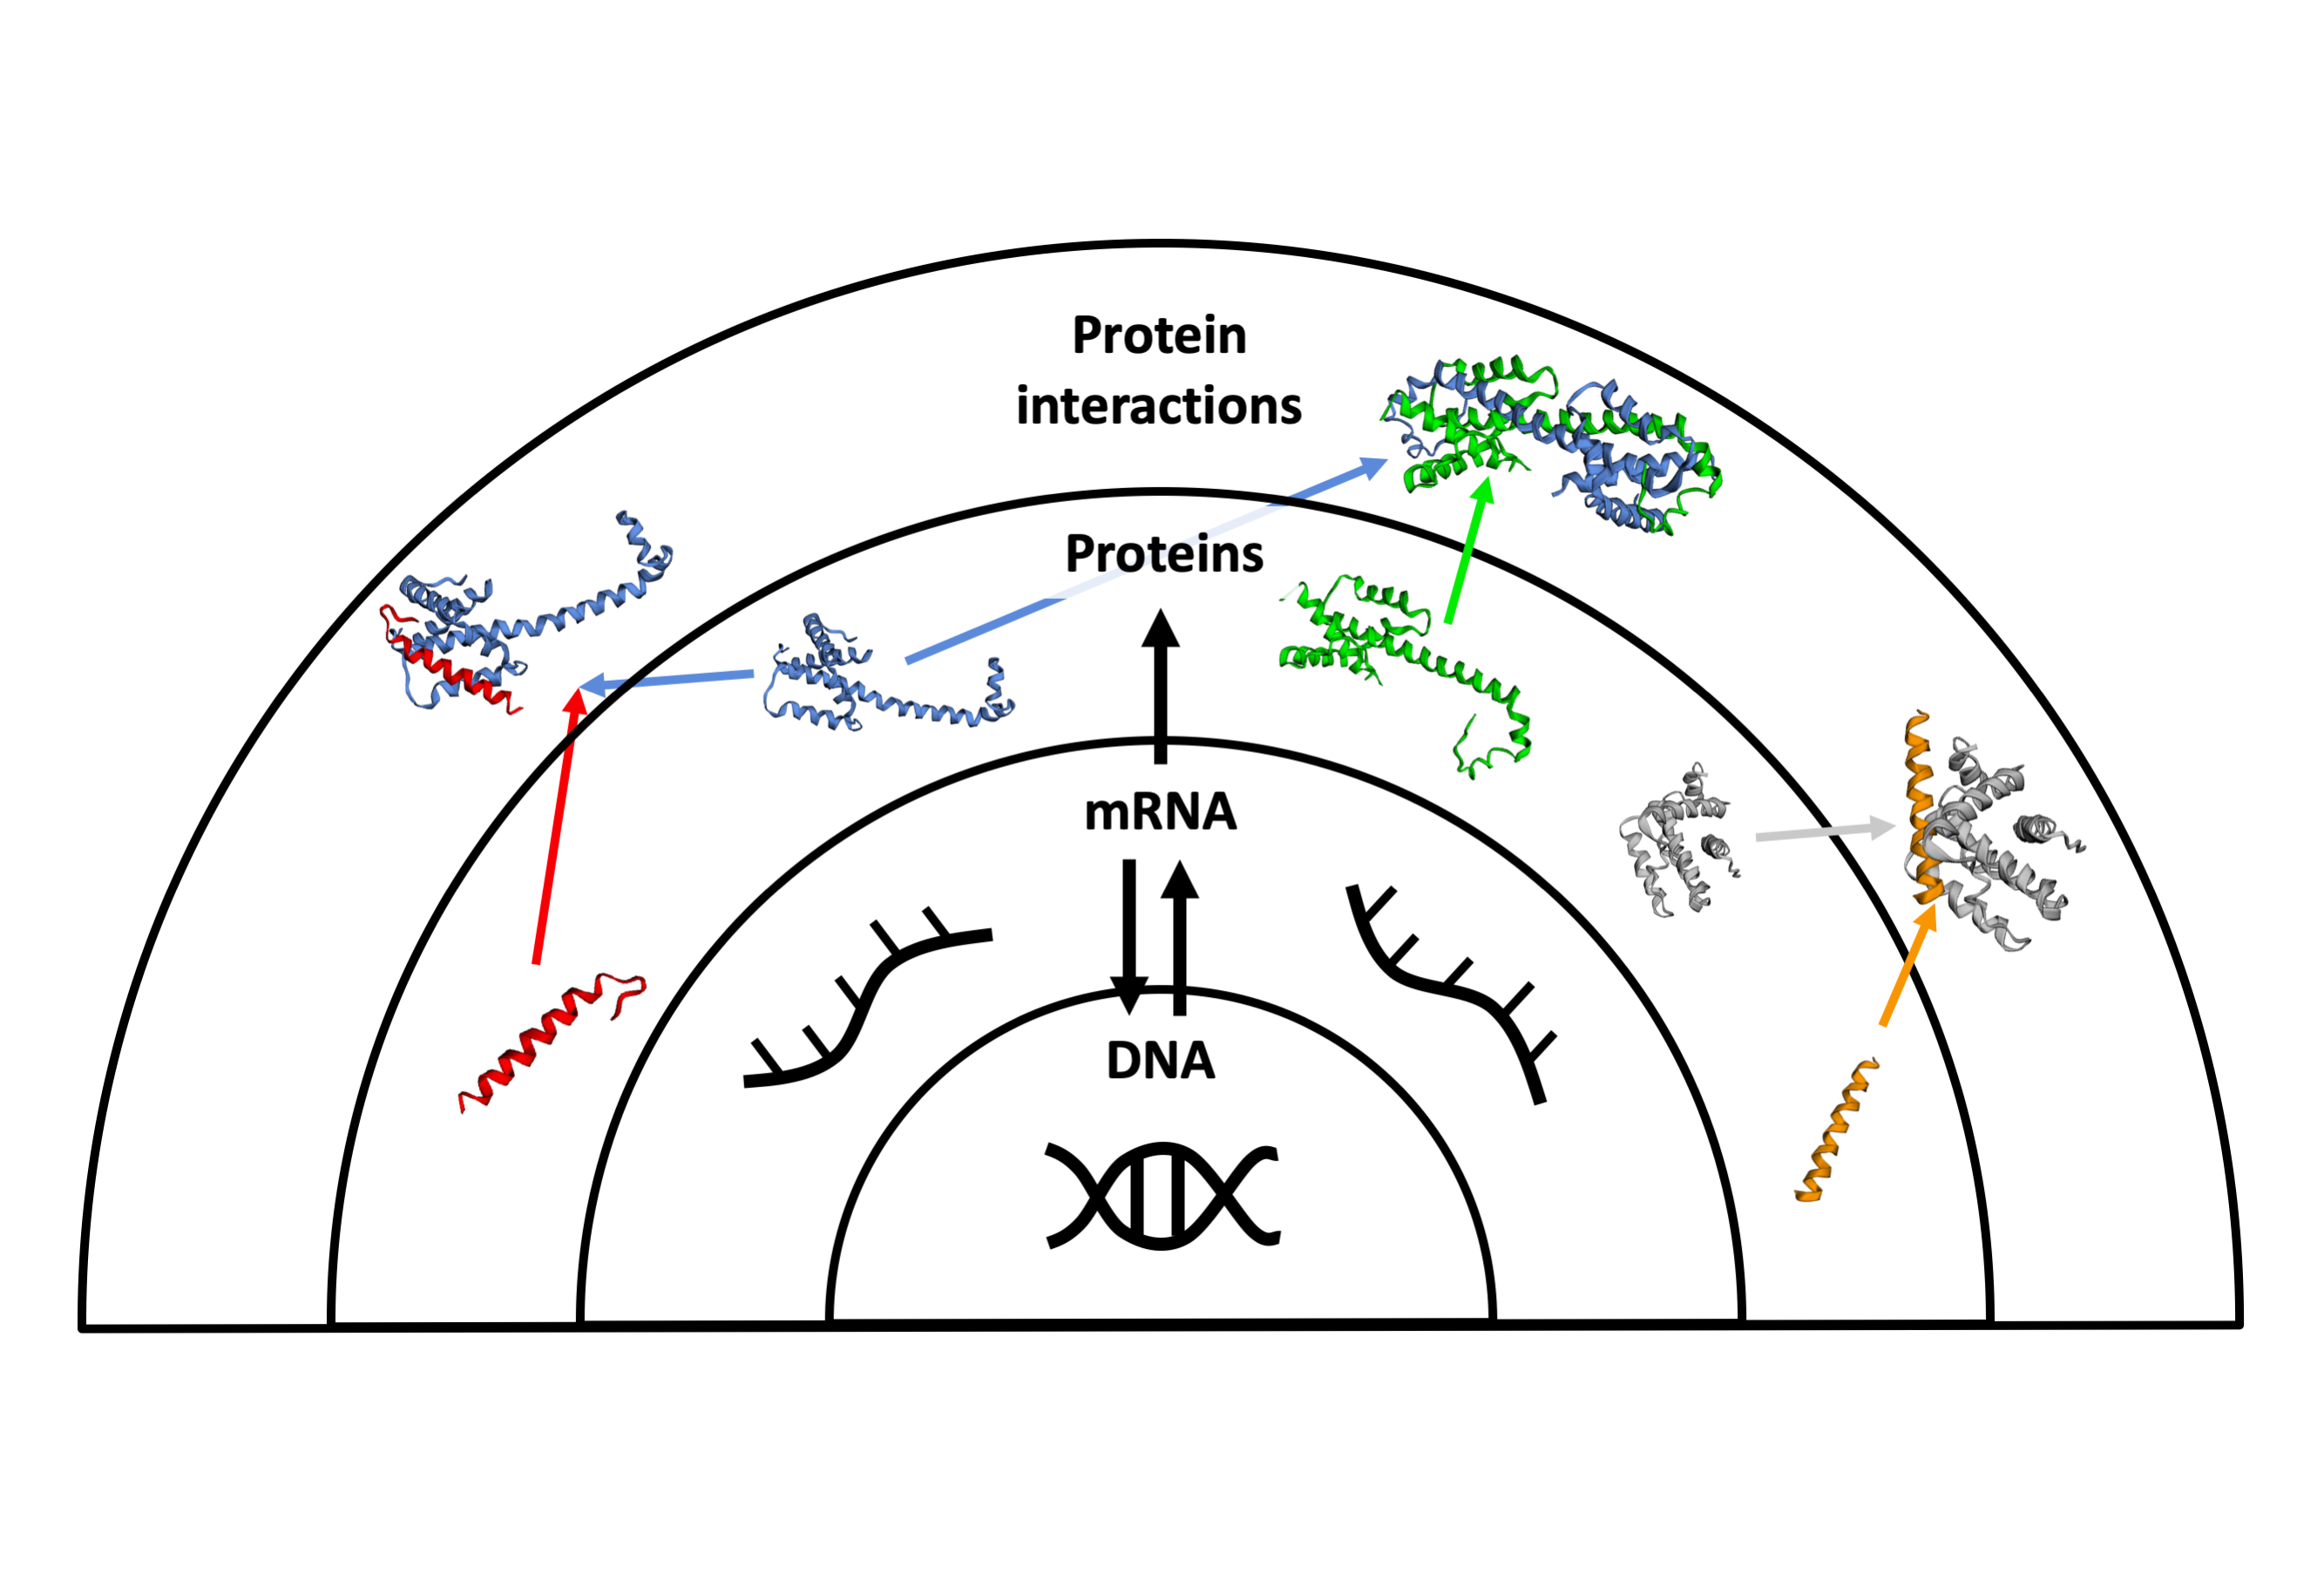 Schematic representation of how the content of the genes (DNA) produces the proteins (becoming mRNA in the middle of the process). In a new level of complexity, the proteins interact specifically with other proteins to successfully complete the biological processes.